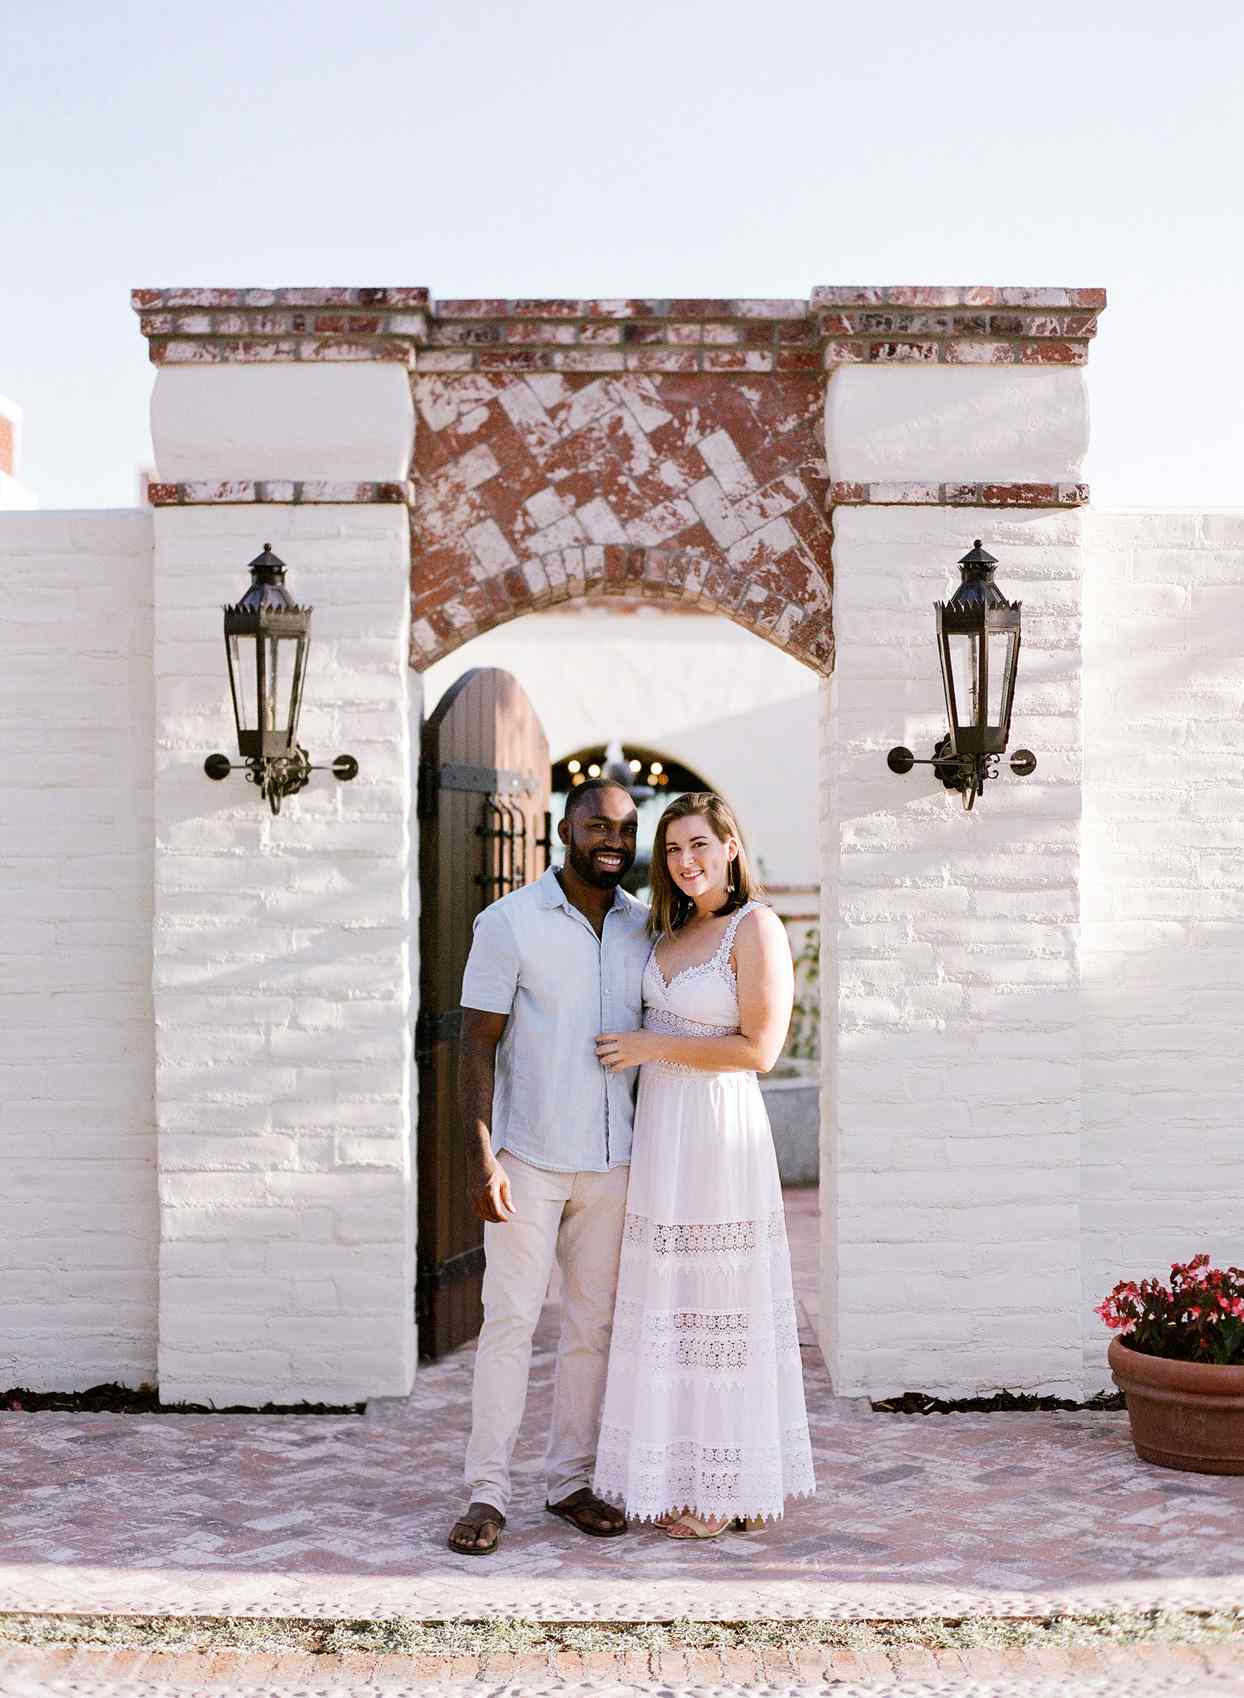 bride and groom to-be smiling outside wedding rehearsal dinner venue